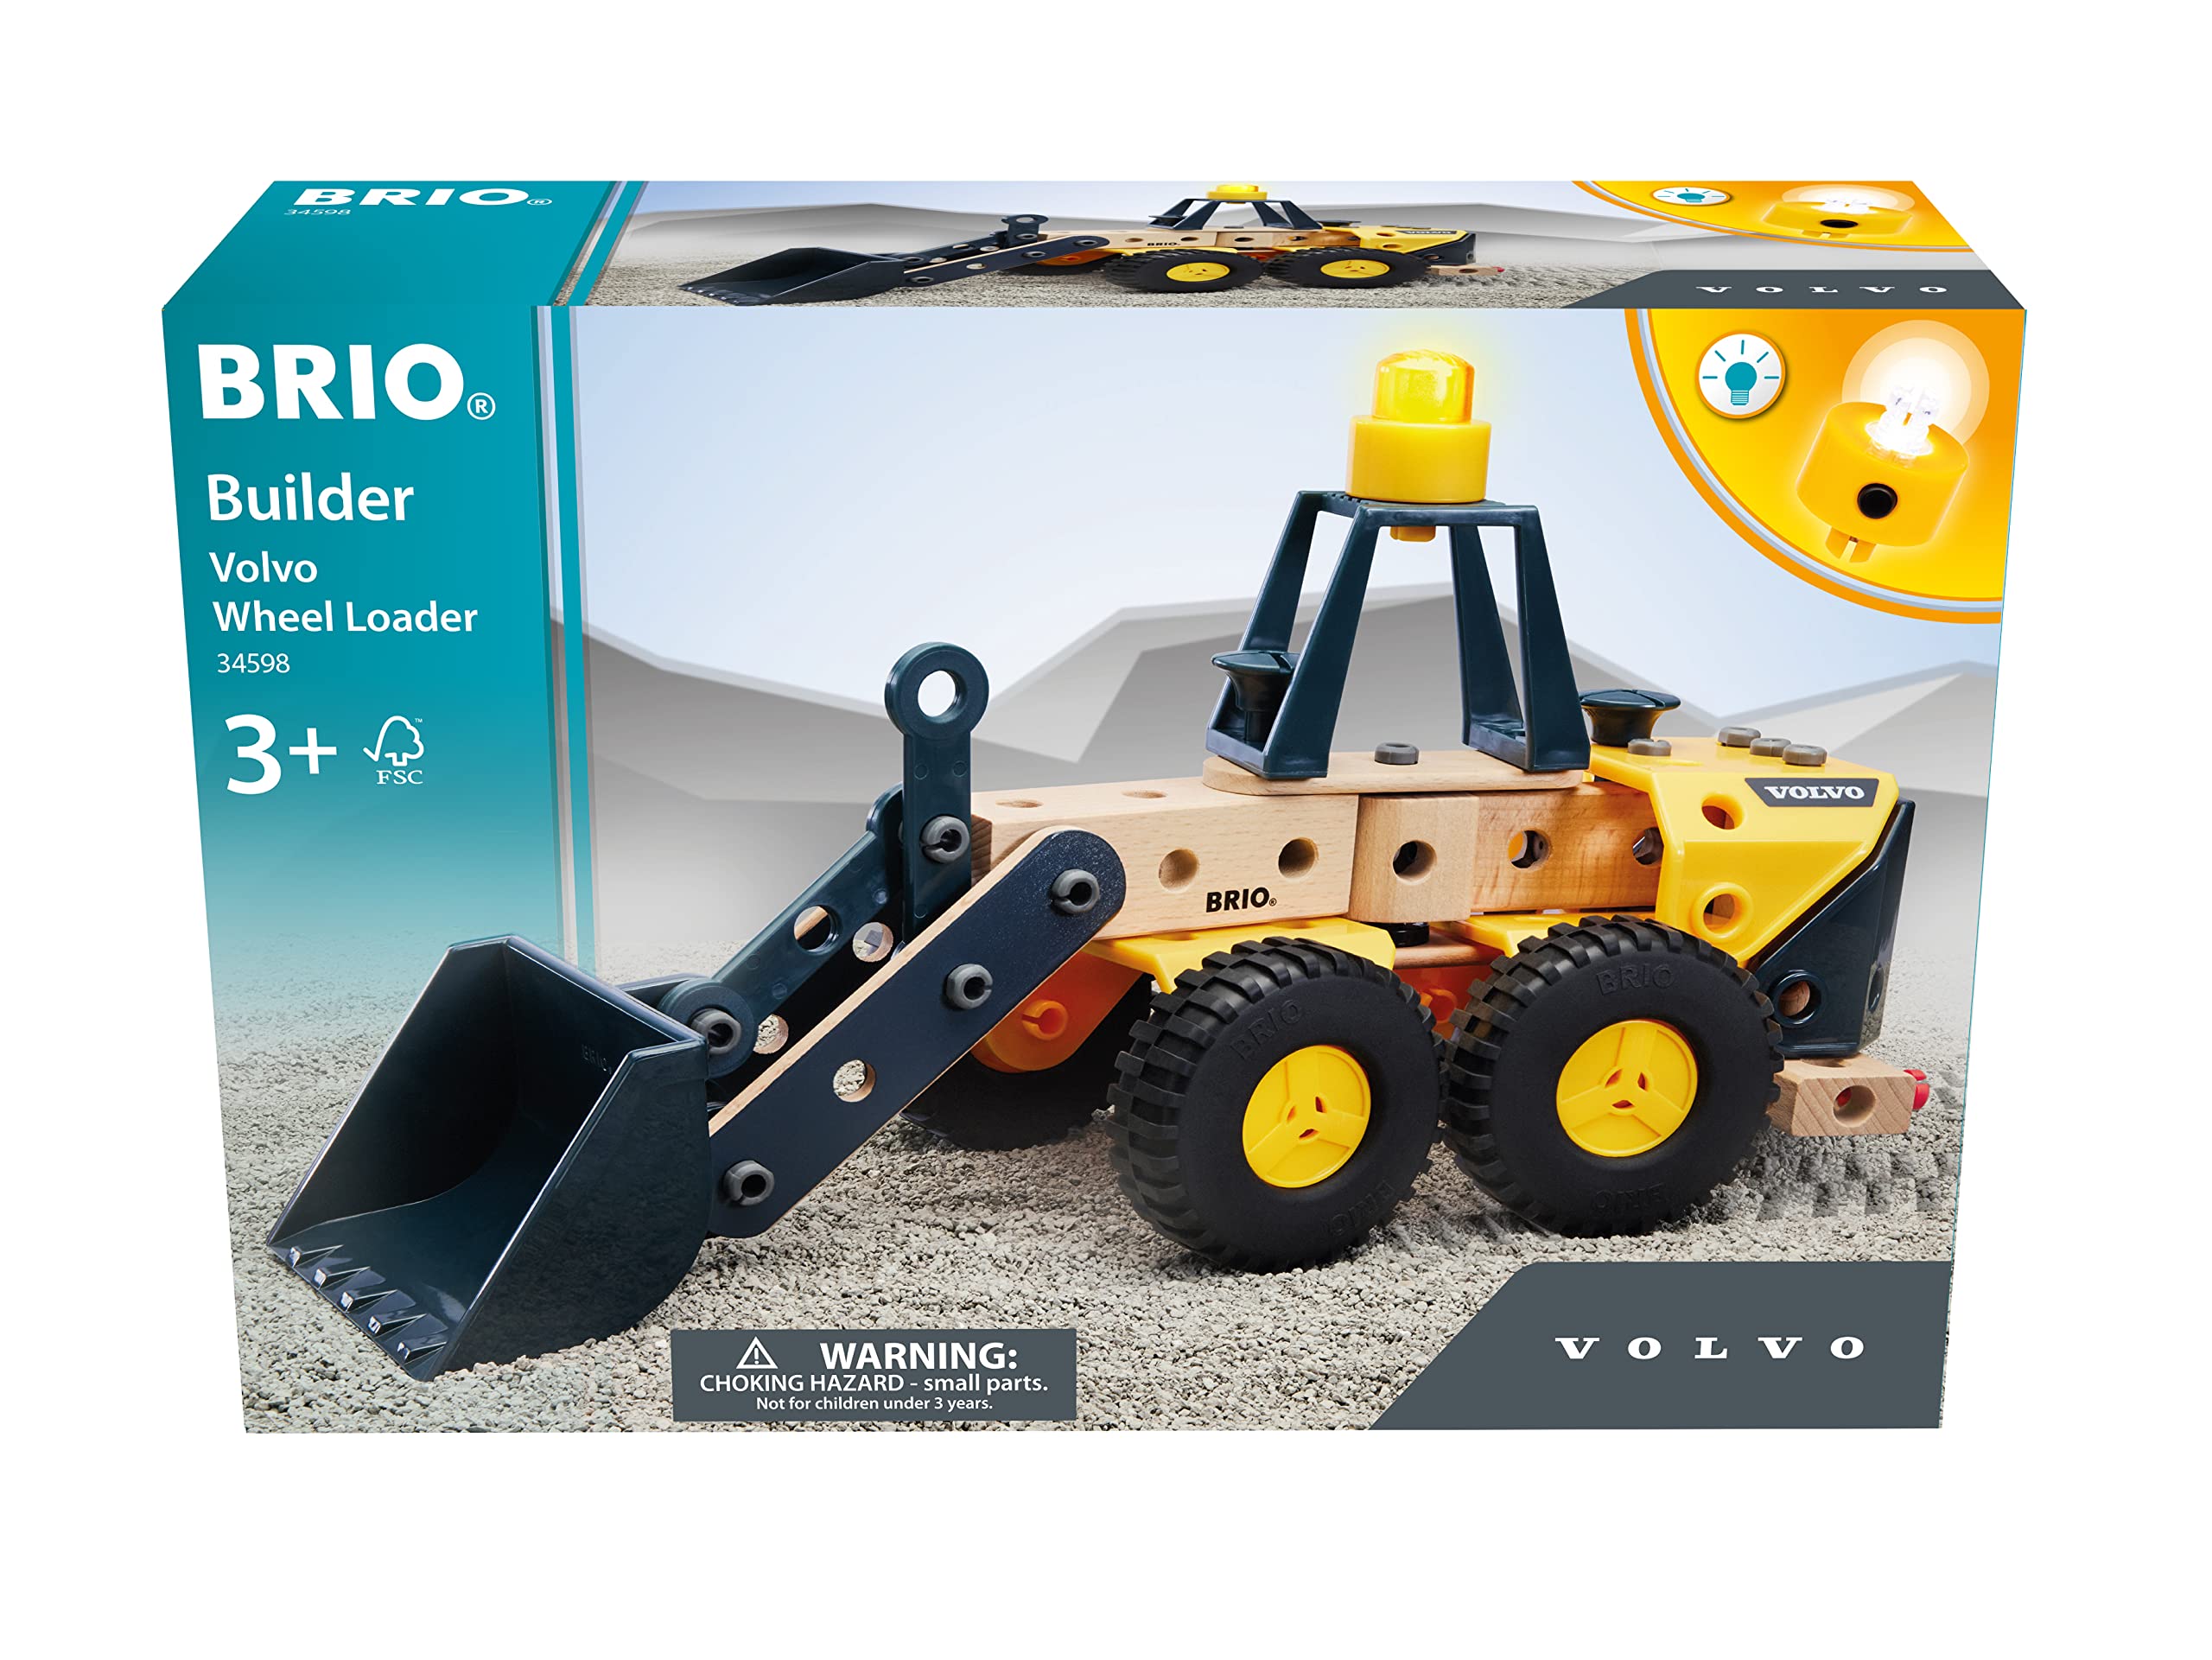 BRIO Builder - 34598 Volvo Wheel Loader | Educational Construction Toy for Kids Age 3 Years Up